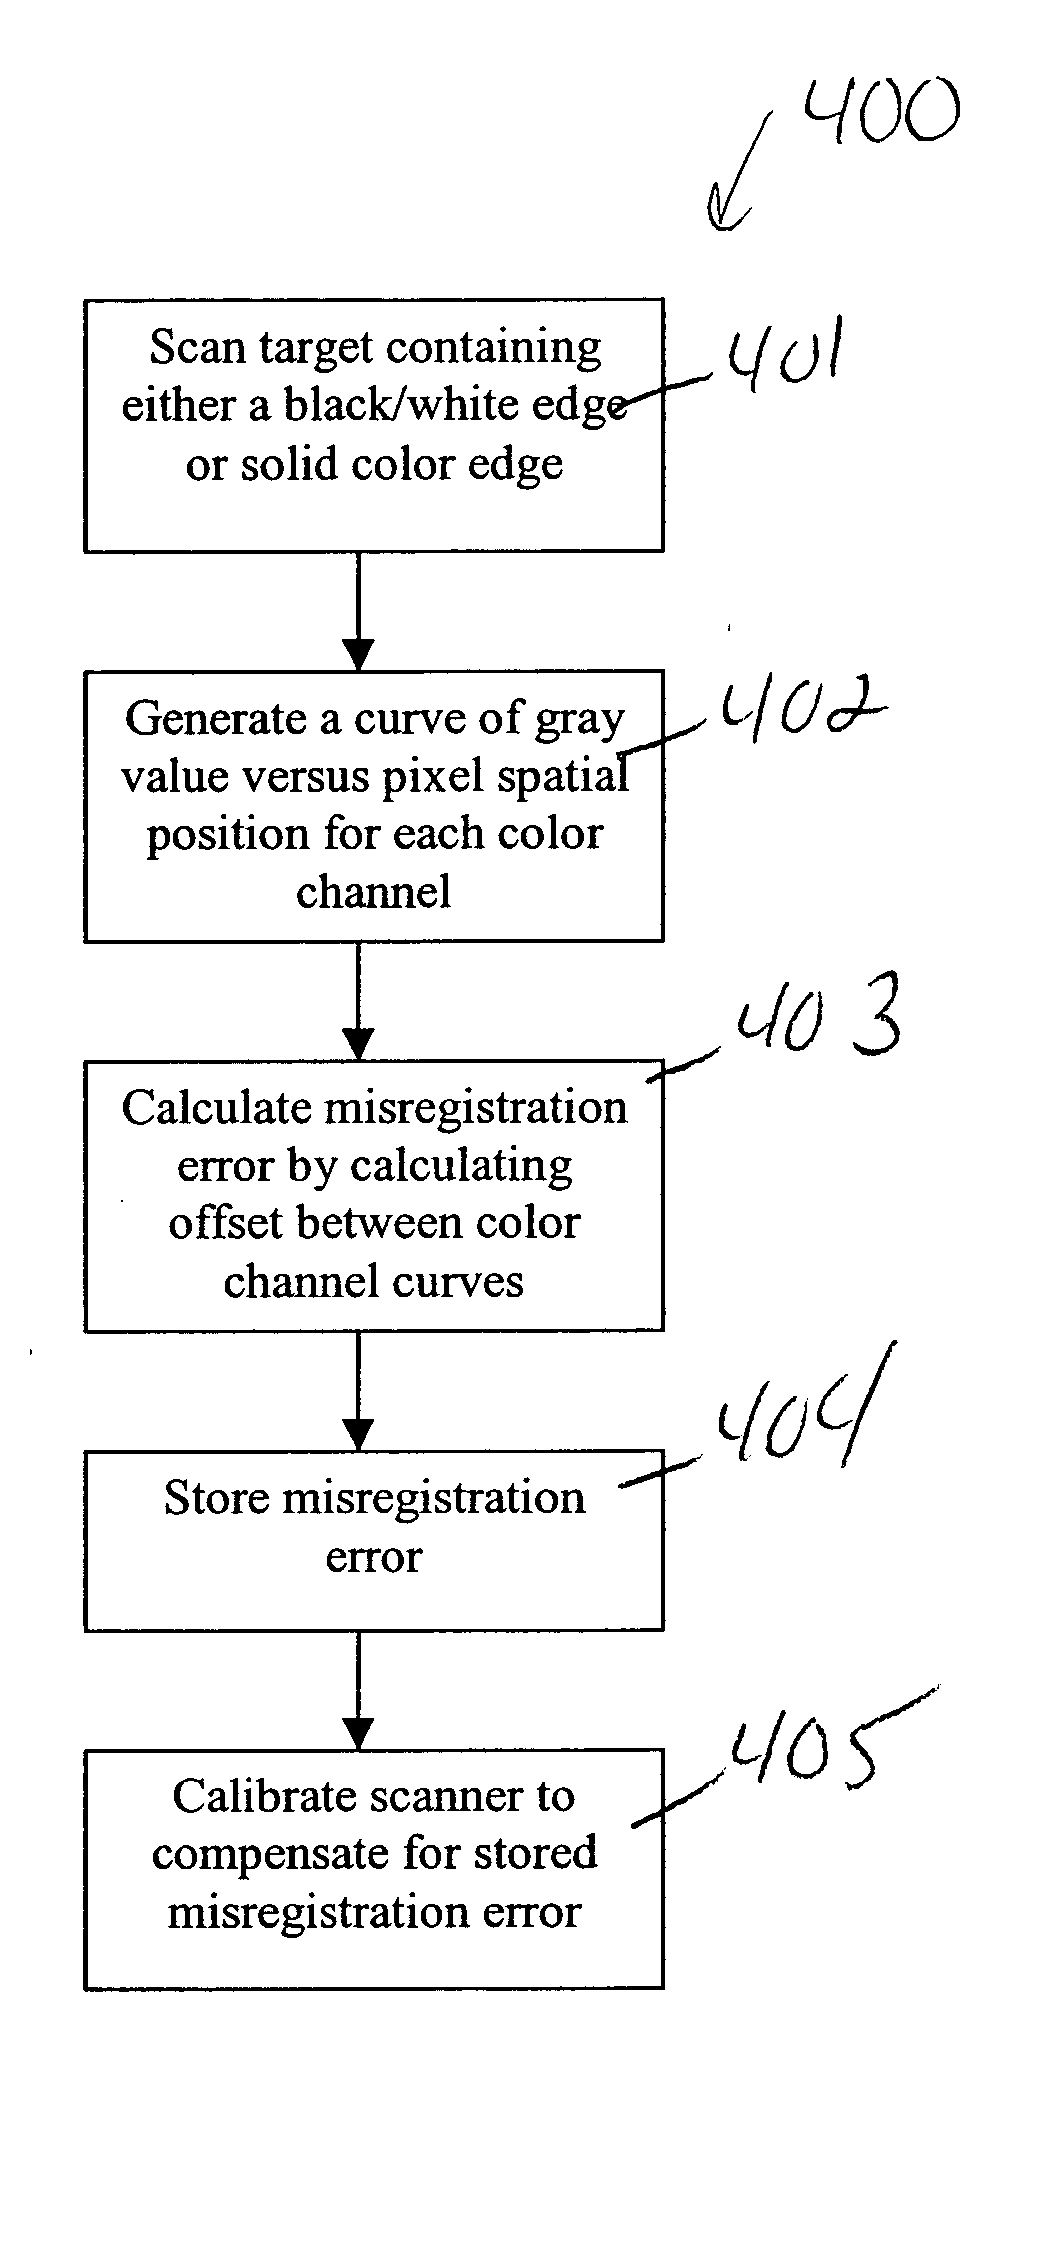 Detecting and compensating for color misregistration produced by a color scanner